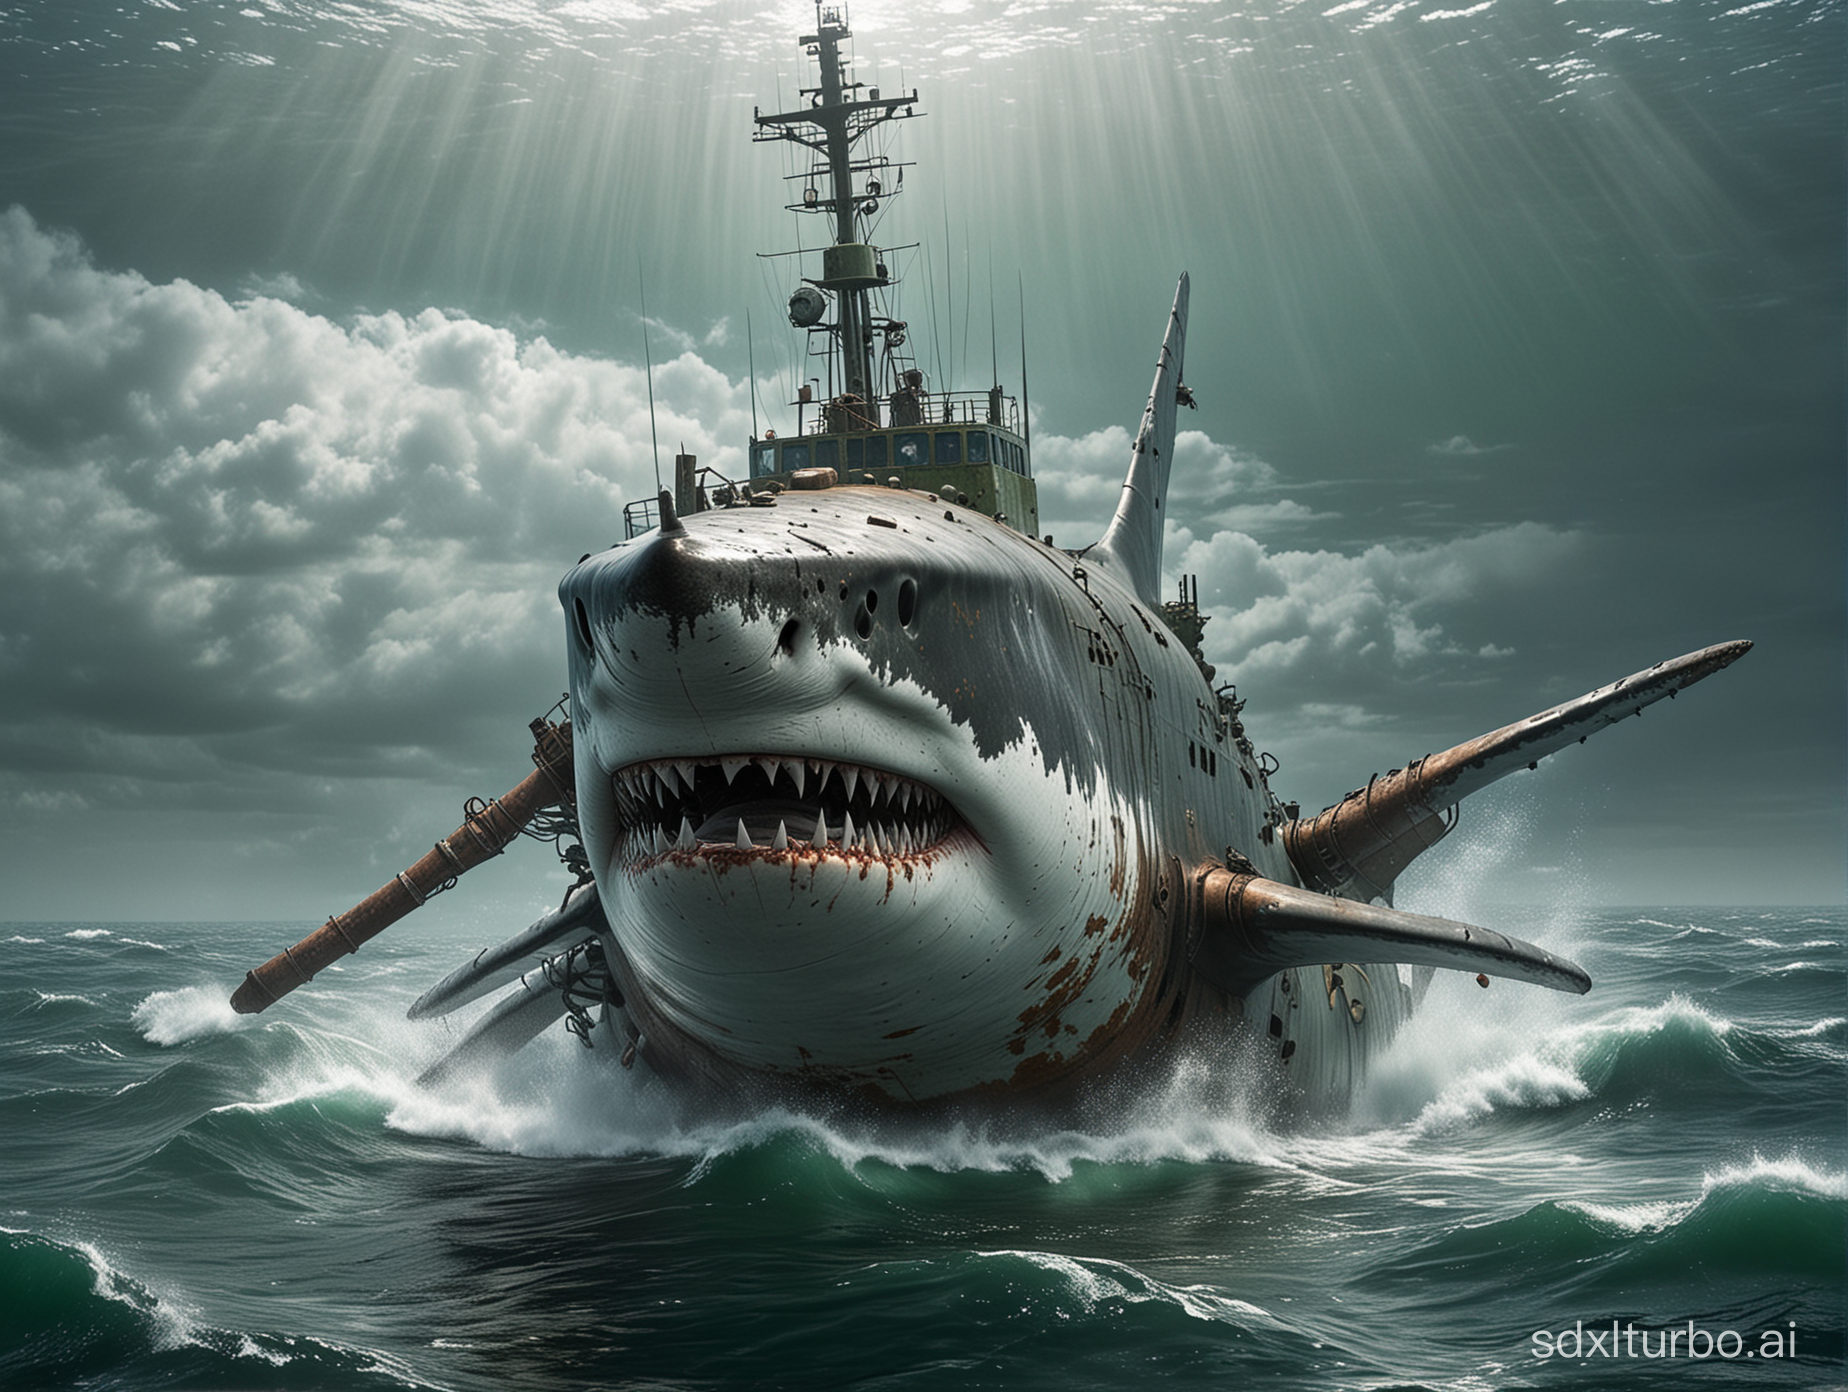 A massive great white Shark is artacking and eating a rusty nuclear submarine in the green frothy ocean n extremely photo realistic generation.